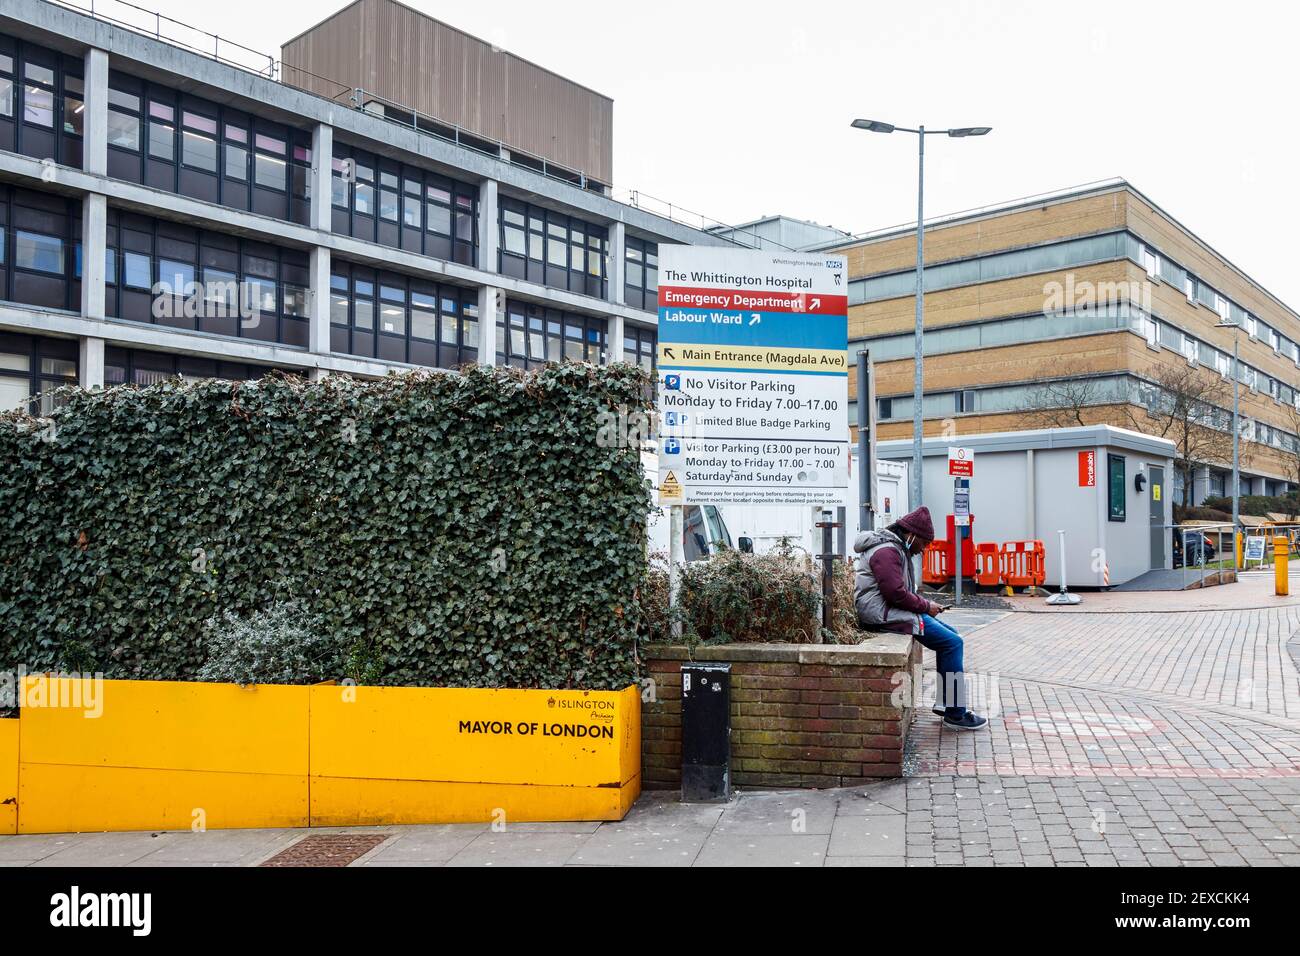 A man waits outside the entrance to the accident and emergency department of the Whittington Hospital on Highgate Hill, Islington, London, UK Stock Photo